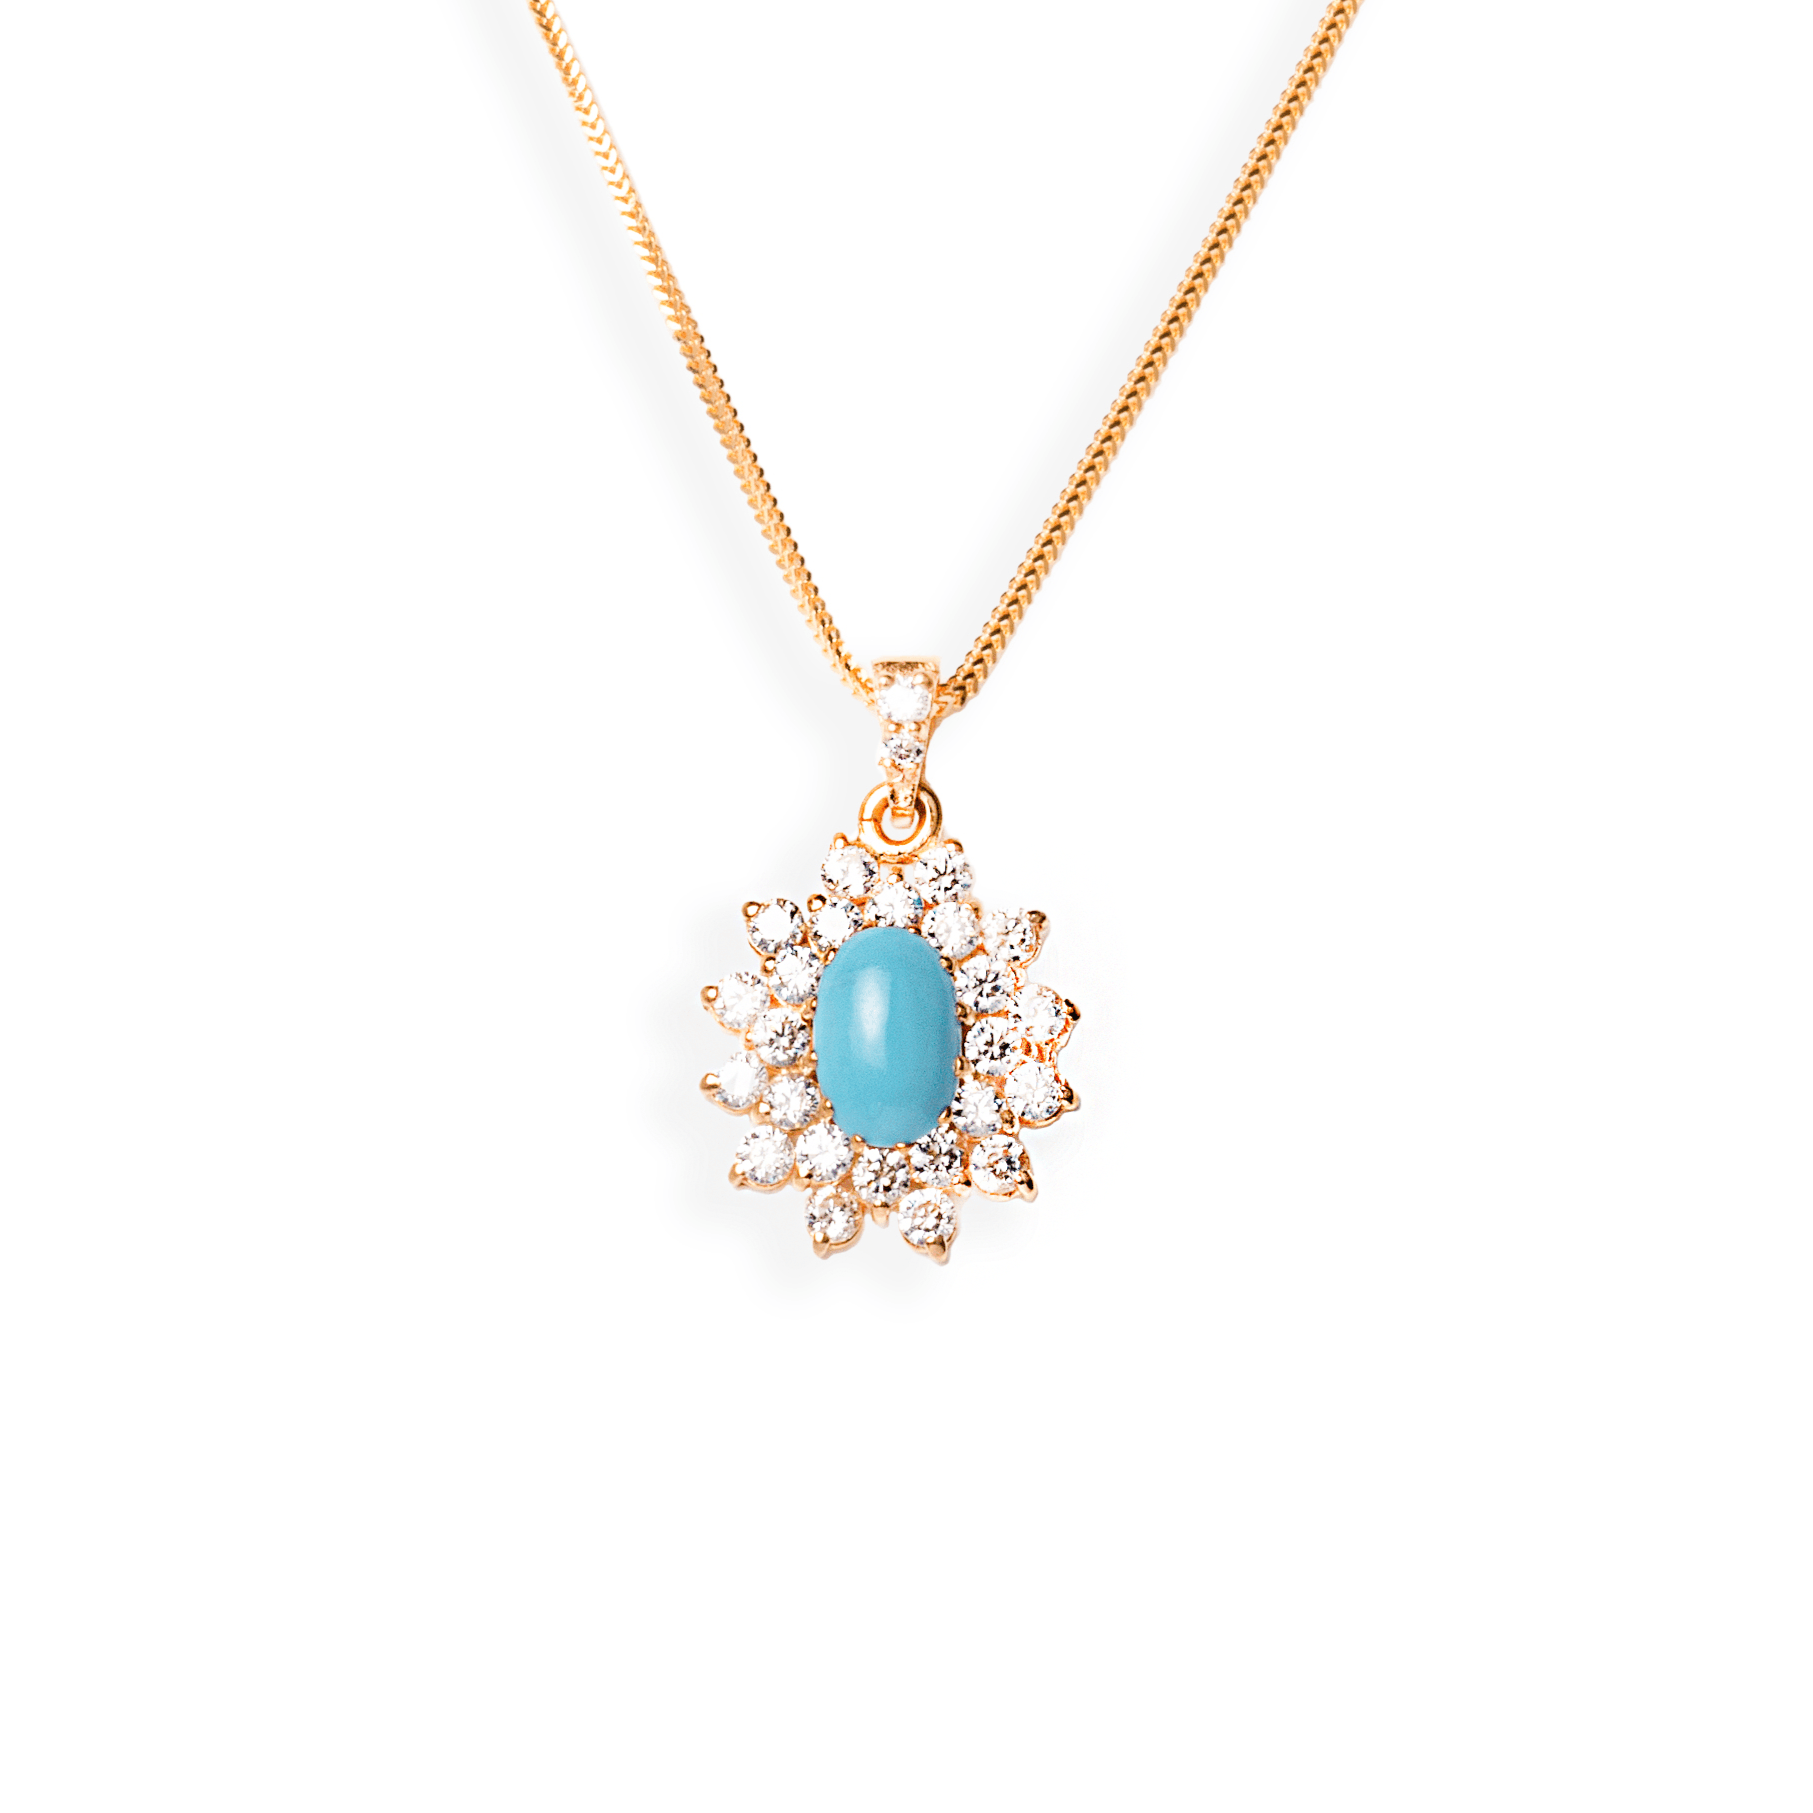 22ct Gold Cubic Zirconia and Turquoise Chain, Pendant and Earrings Set (10.2g) C-3795 P-7300 E-7300 - Minar Jewellers